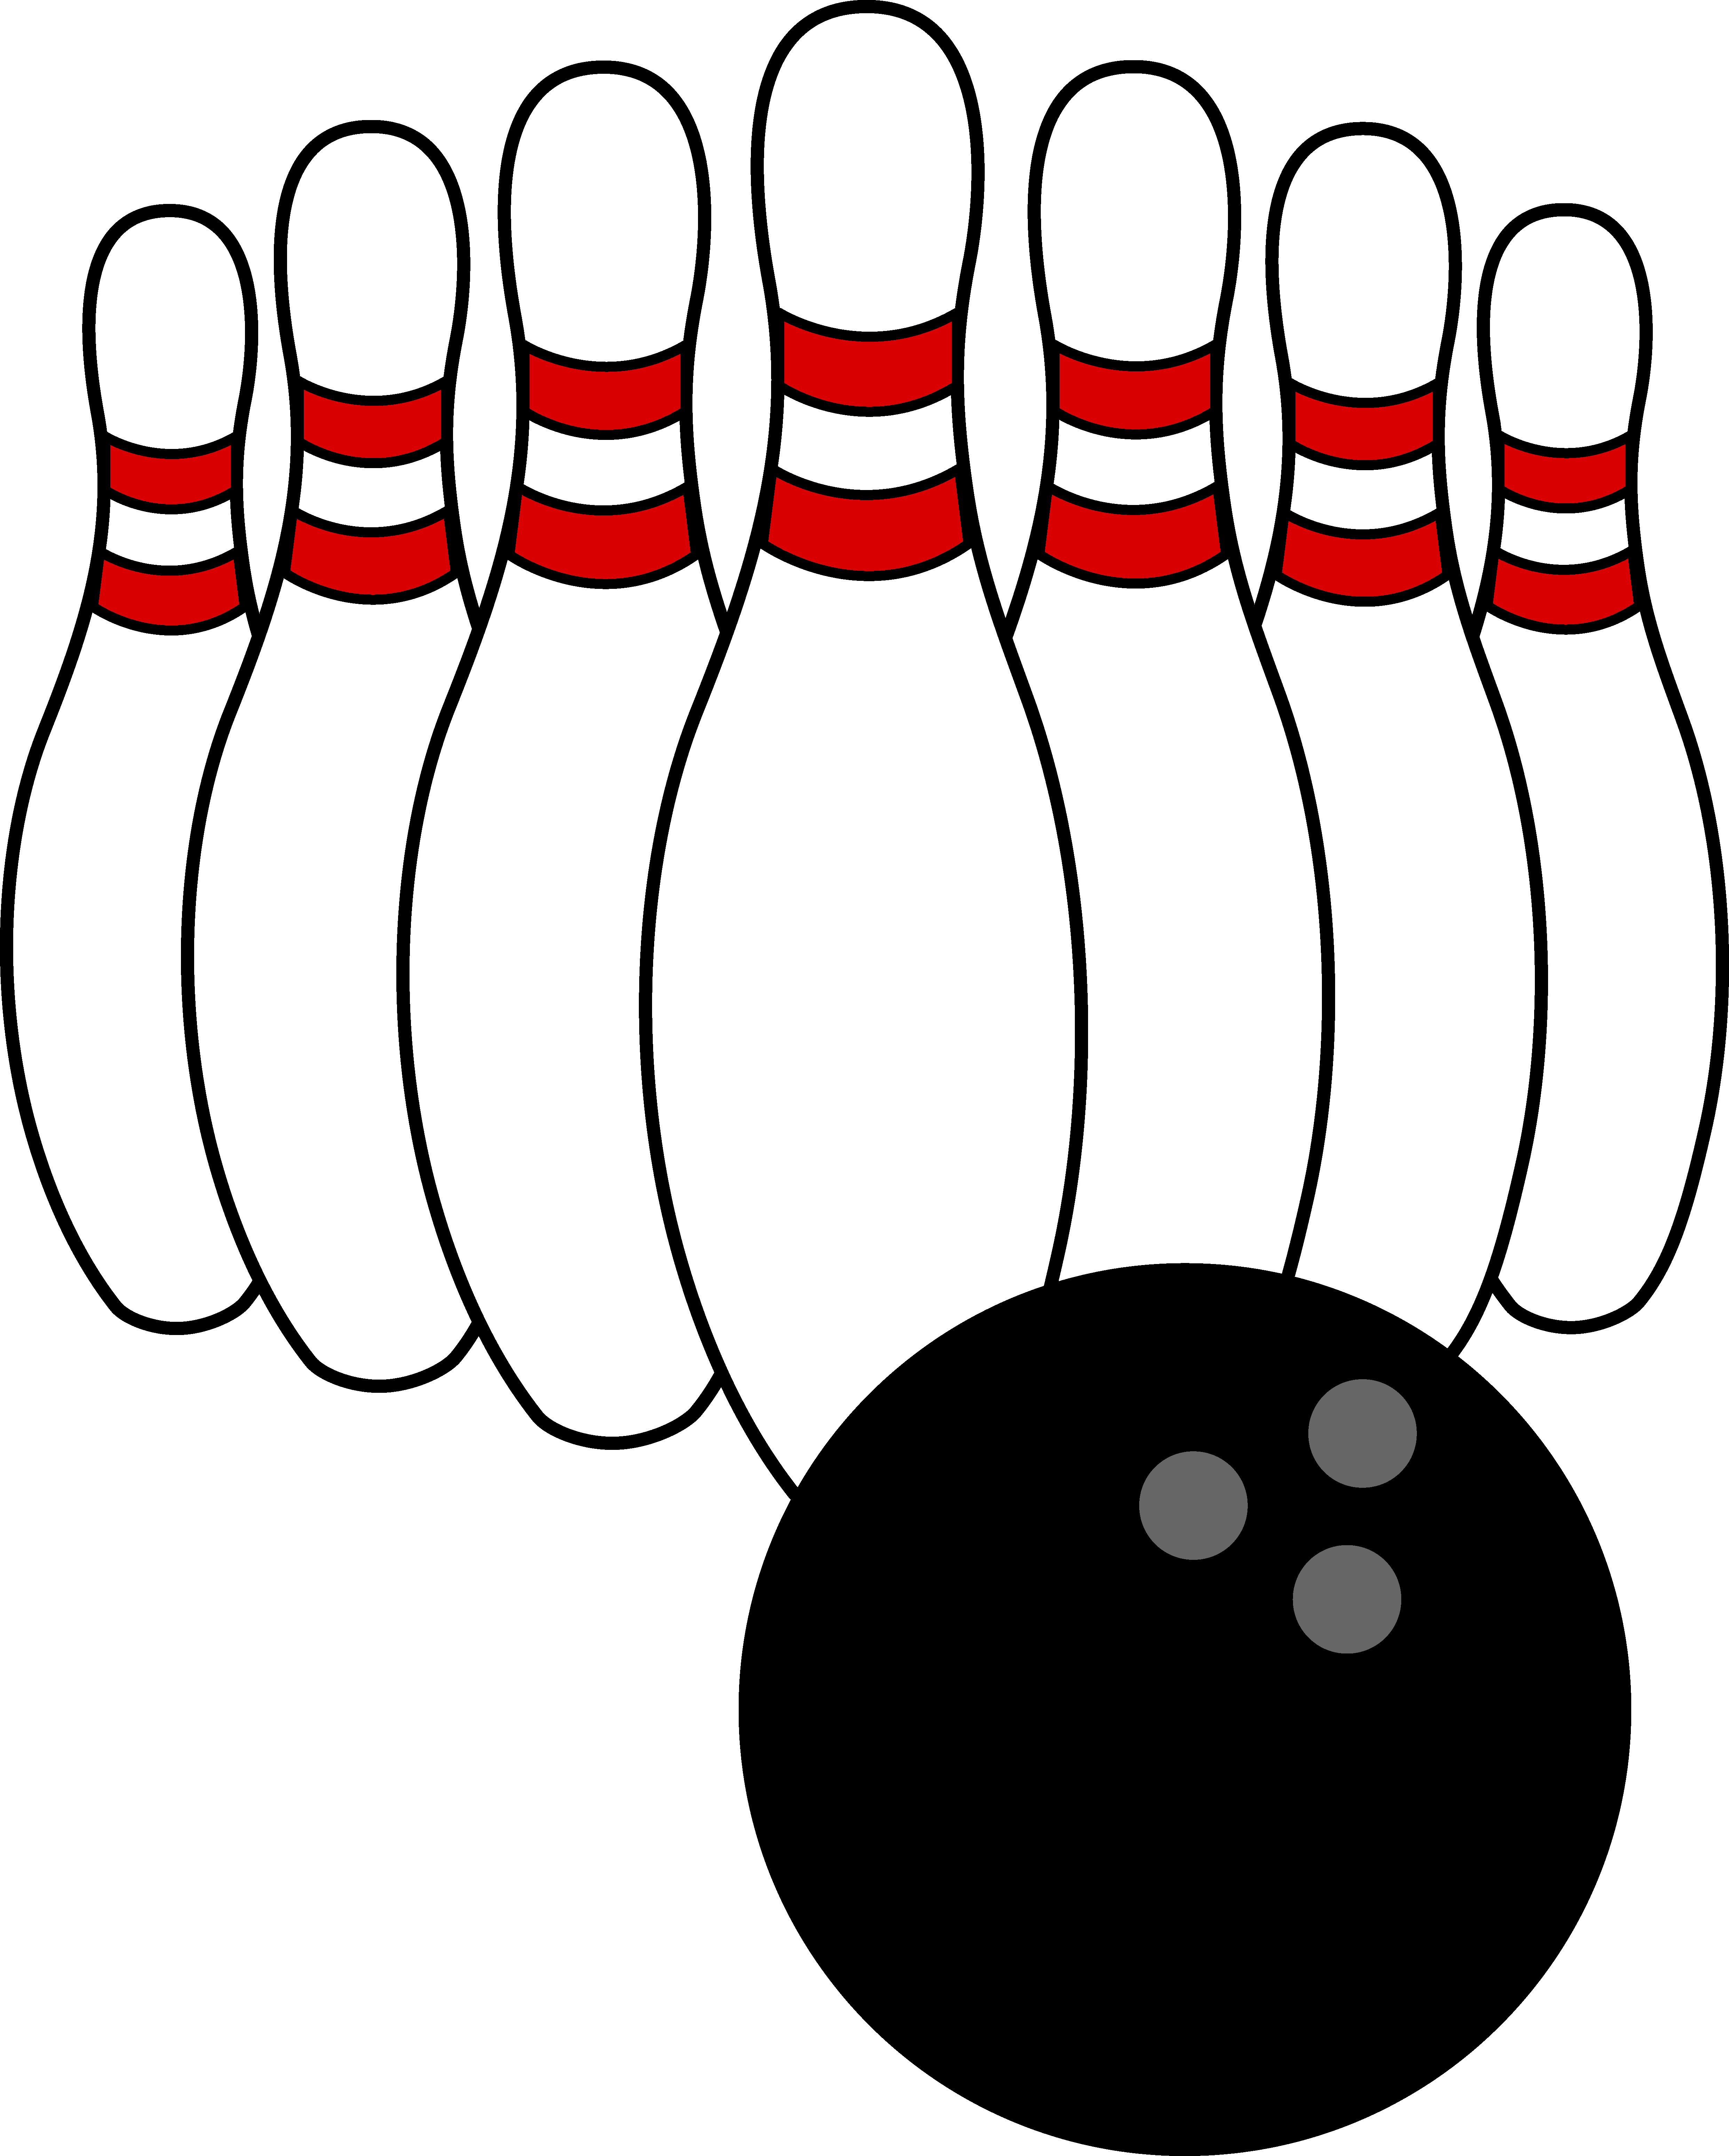 Bowling images clip art free